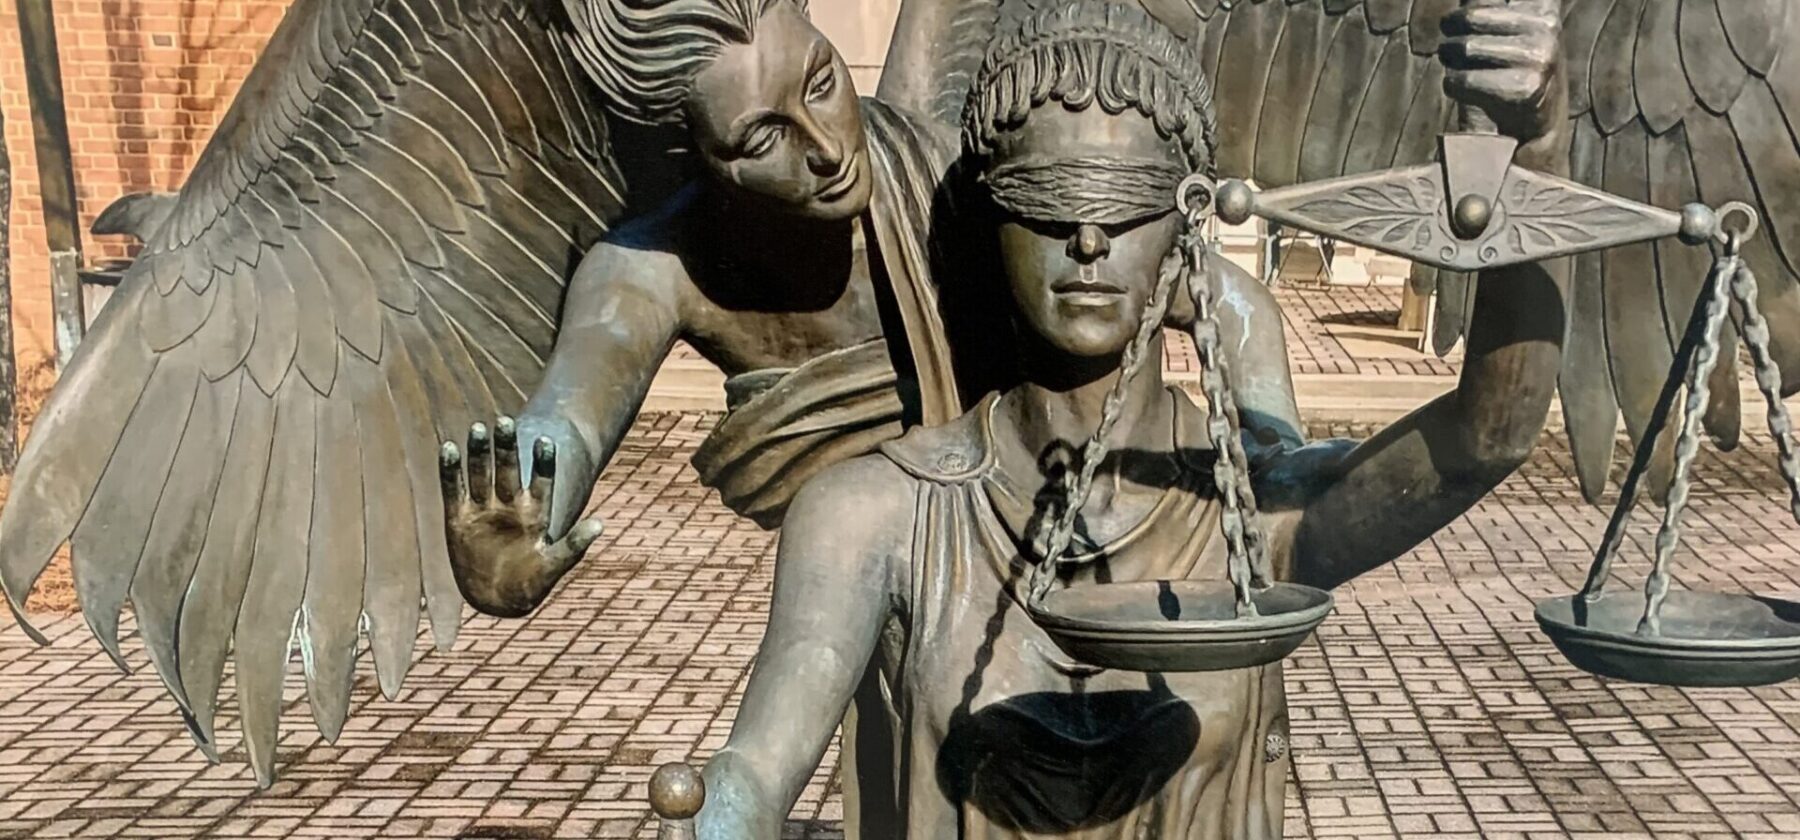 Justice and Mercy statue by Glynn Acree